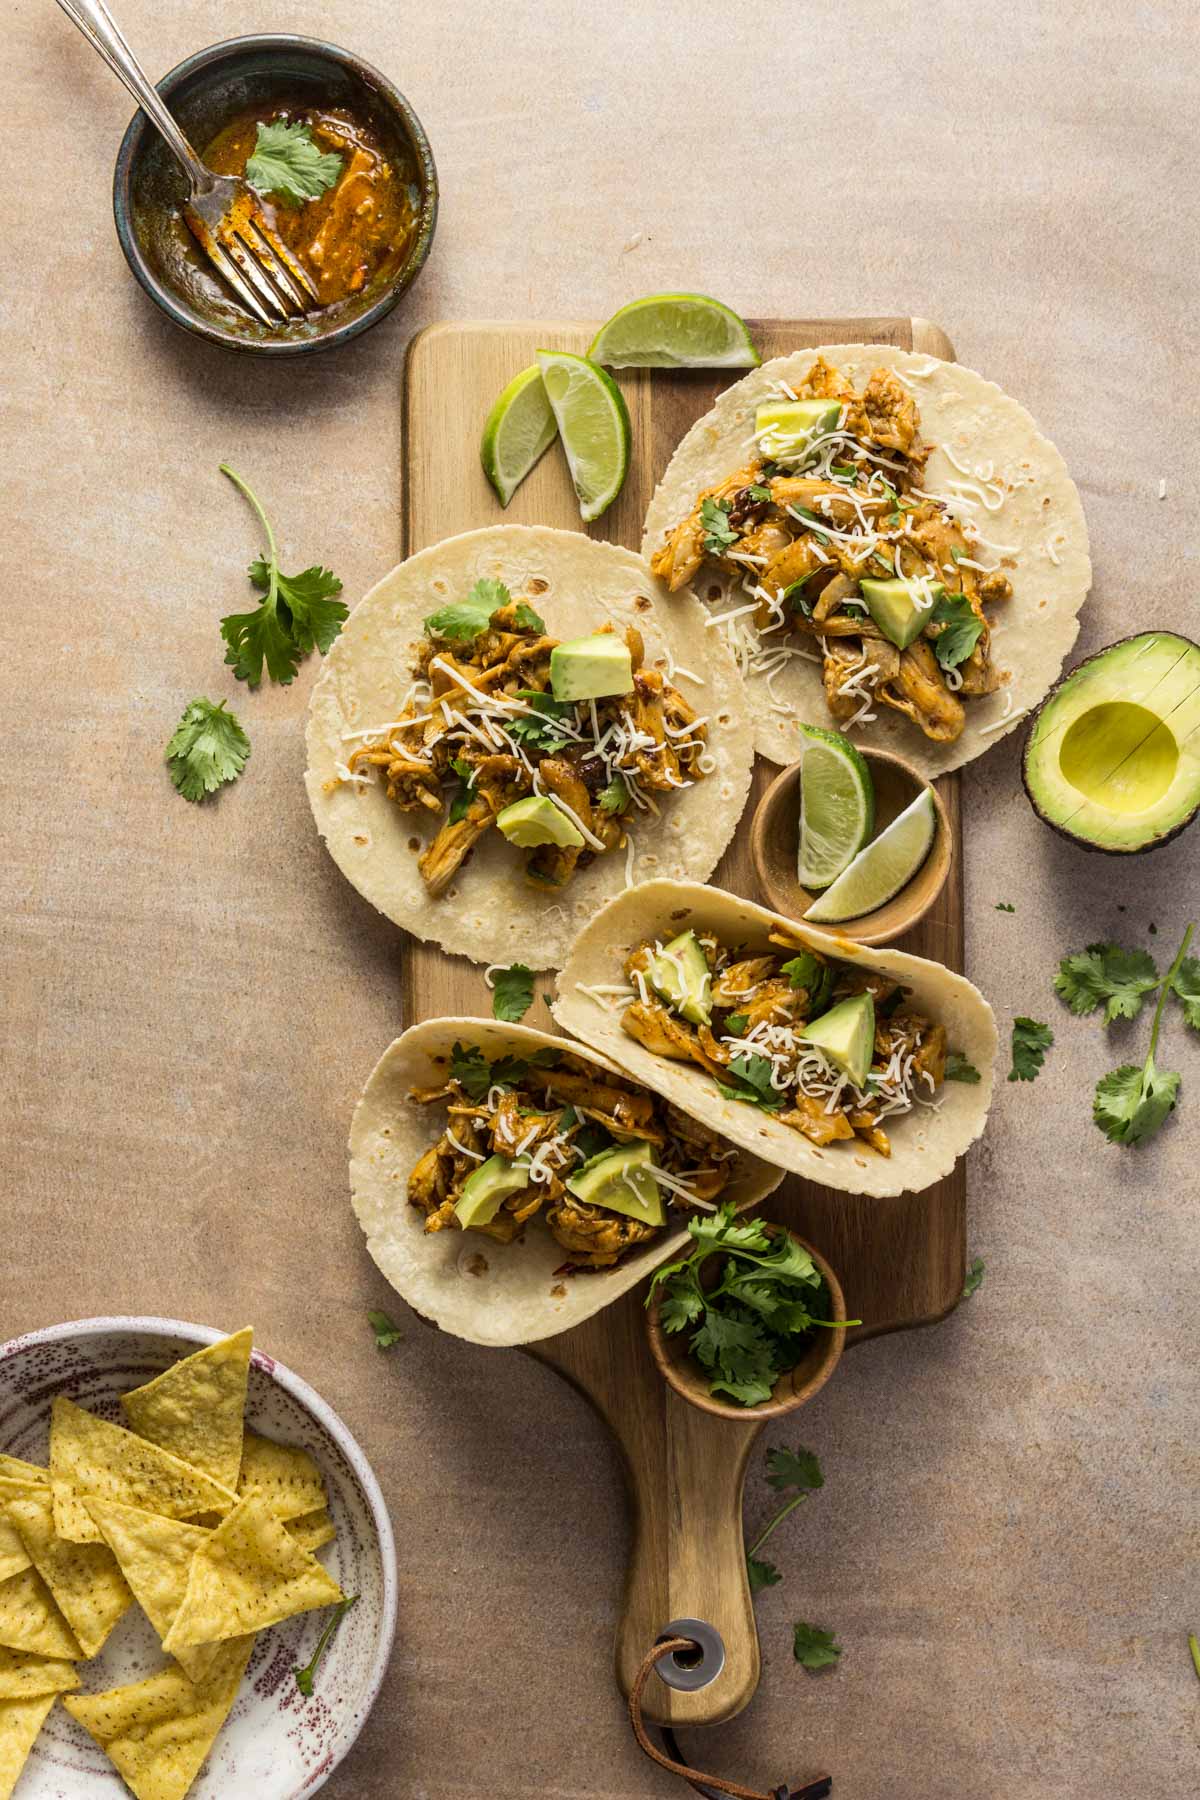 Chipotle chicken orange tacos with avocado on a wooden board